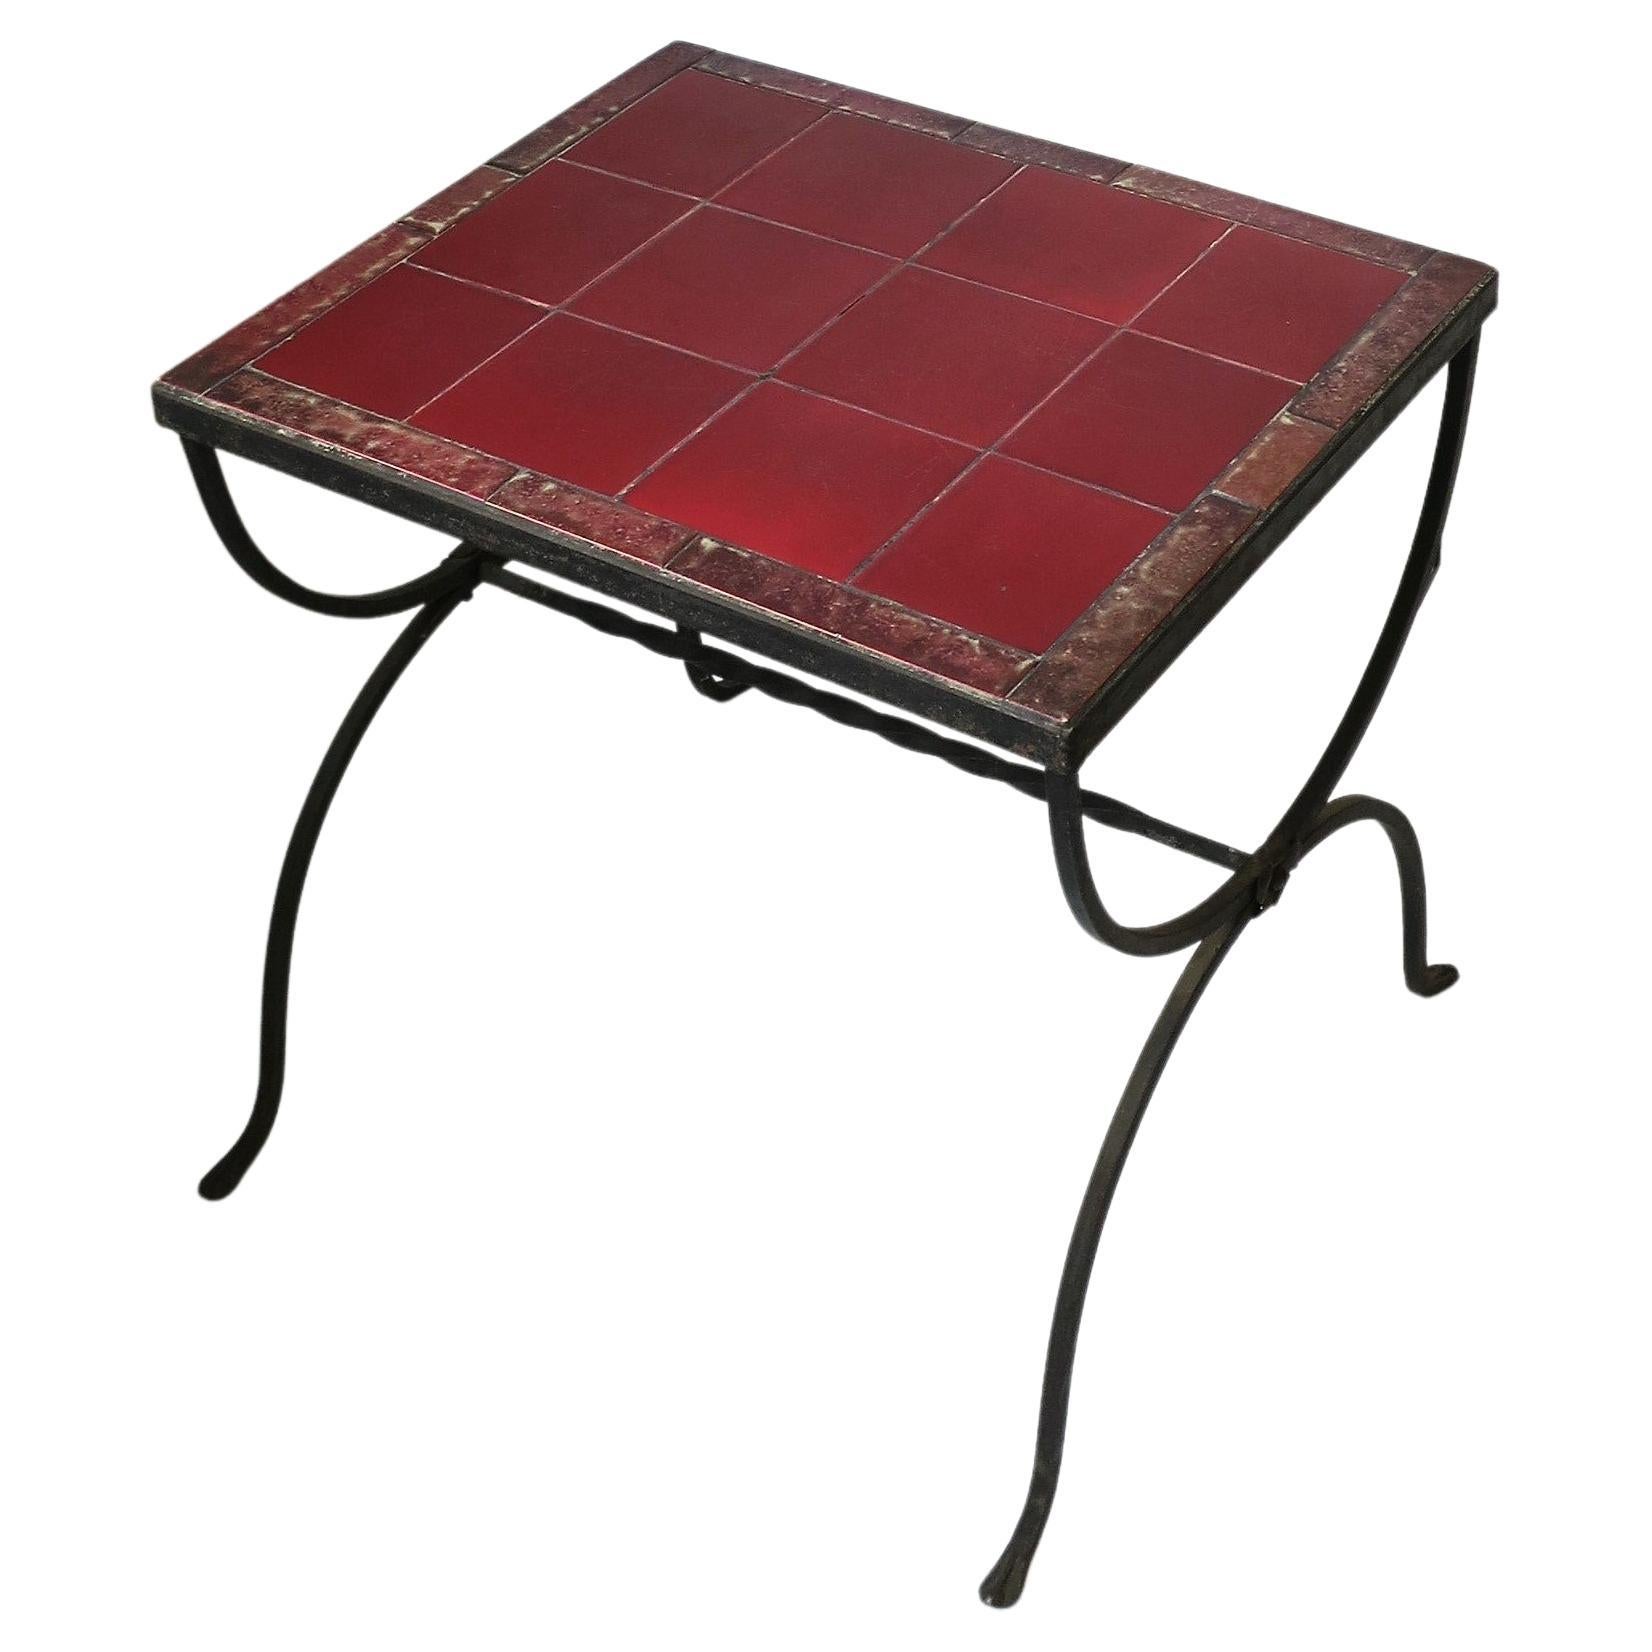 Red Burgundy Tile Top & Iron Side or End Table Patio & Outdoors Regency Revival